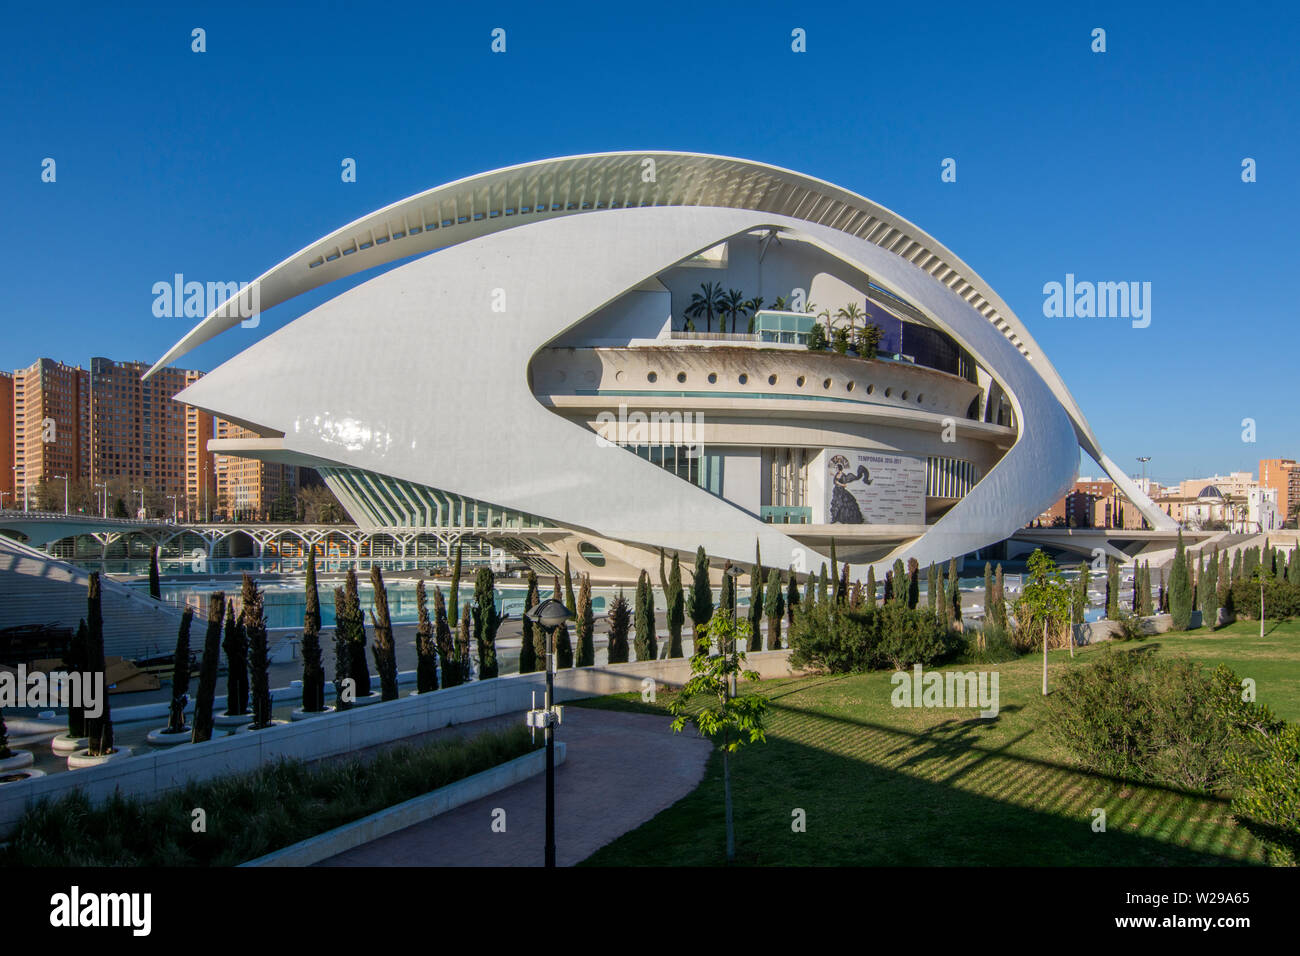 Valencia, Spain; March 2017: a view on one of the buildings of the City of Arts and Sciences named El Palau de les Arts Reina Sofia, on a beautiful wa Stock Photo